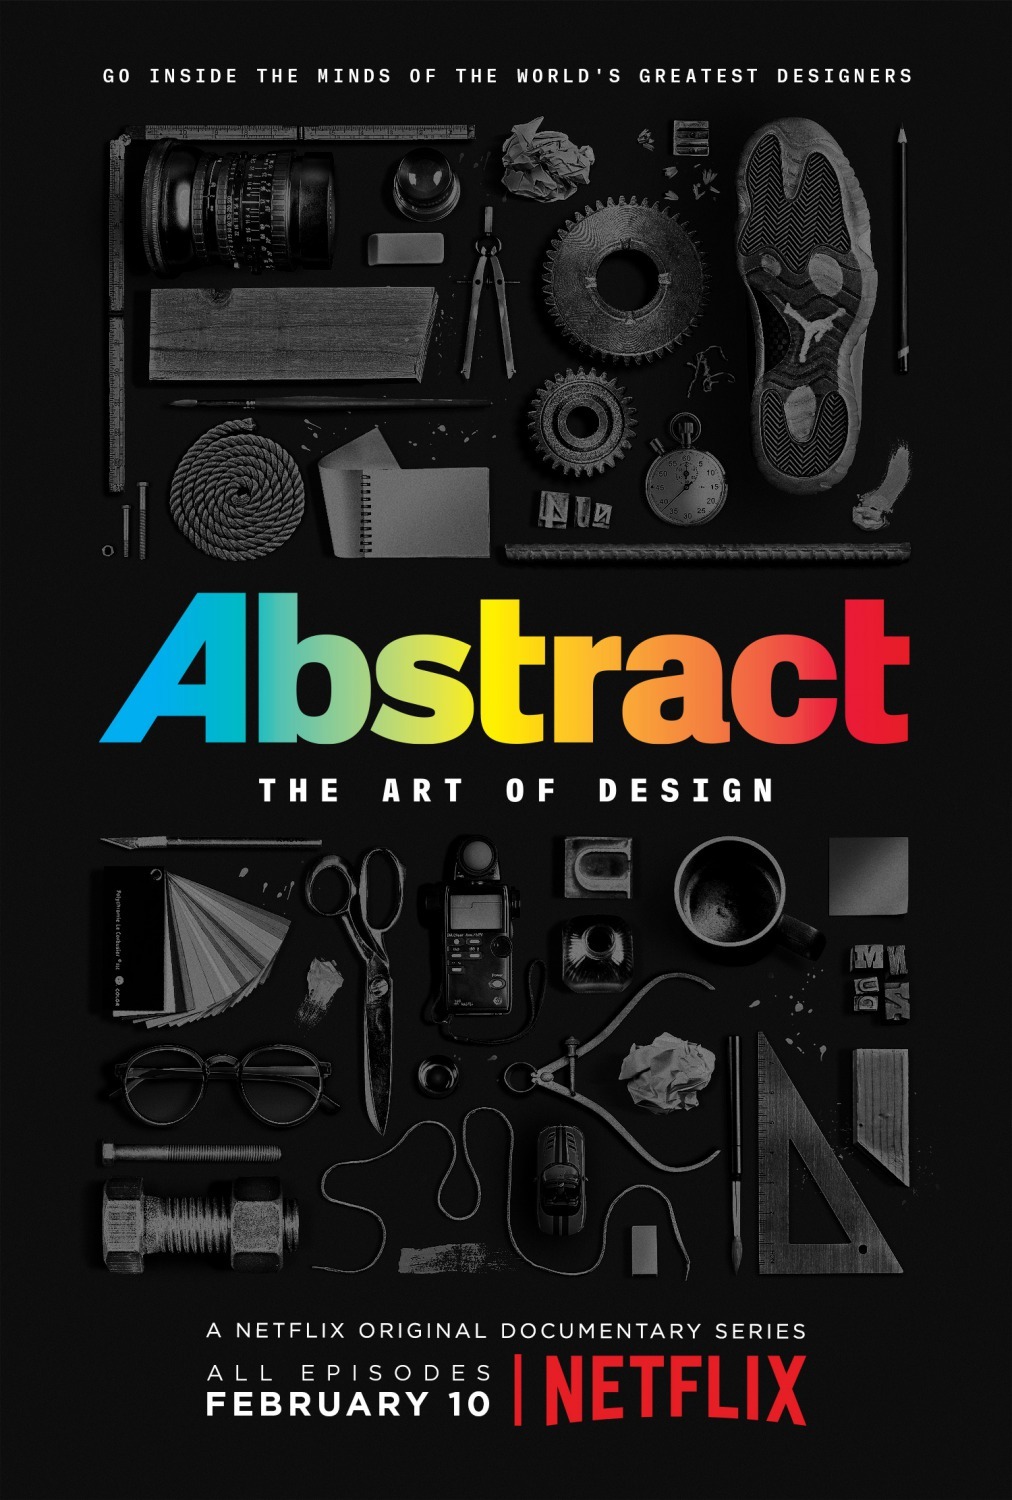 Abstract- The Art of Design - marketing documentaries